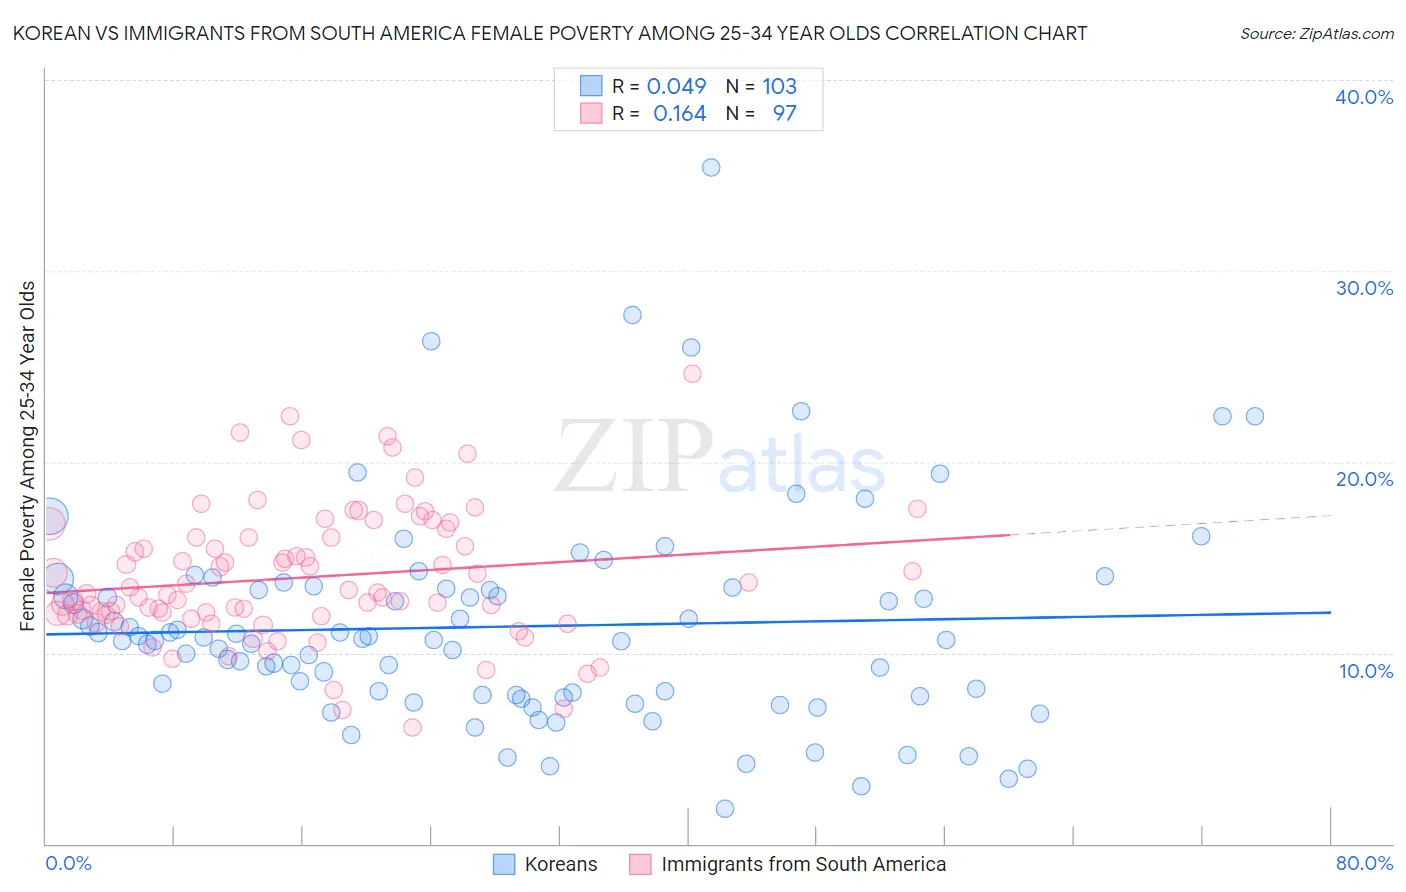 Korean vs Immigrants from South America Female Poverty Among 25-34 Year Olds